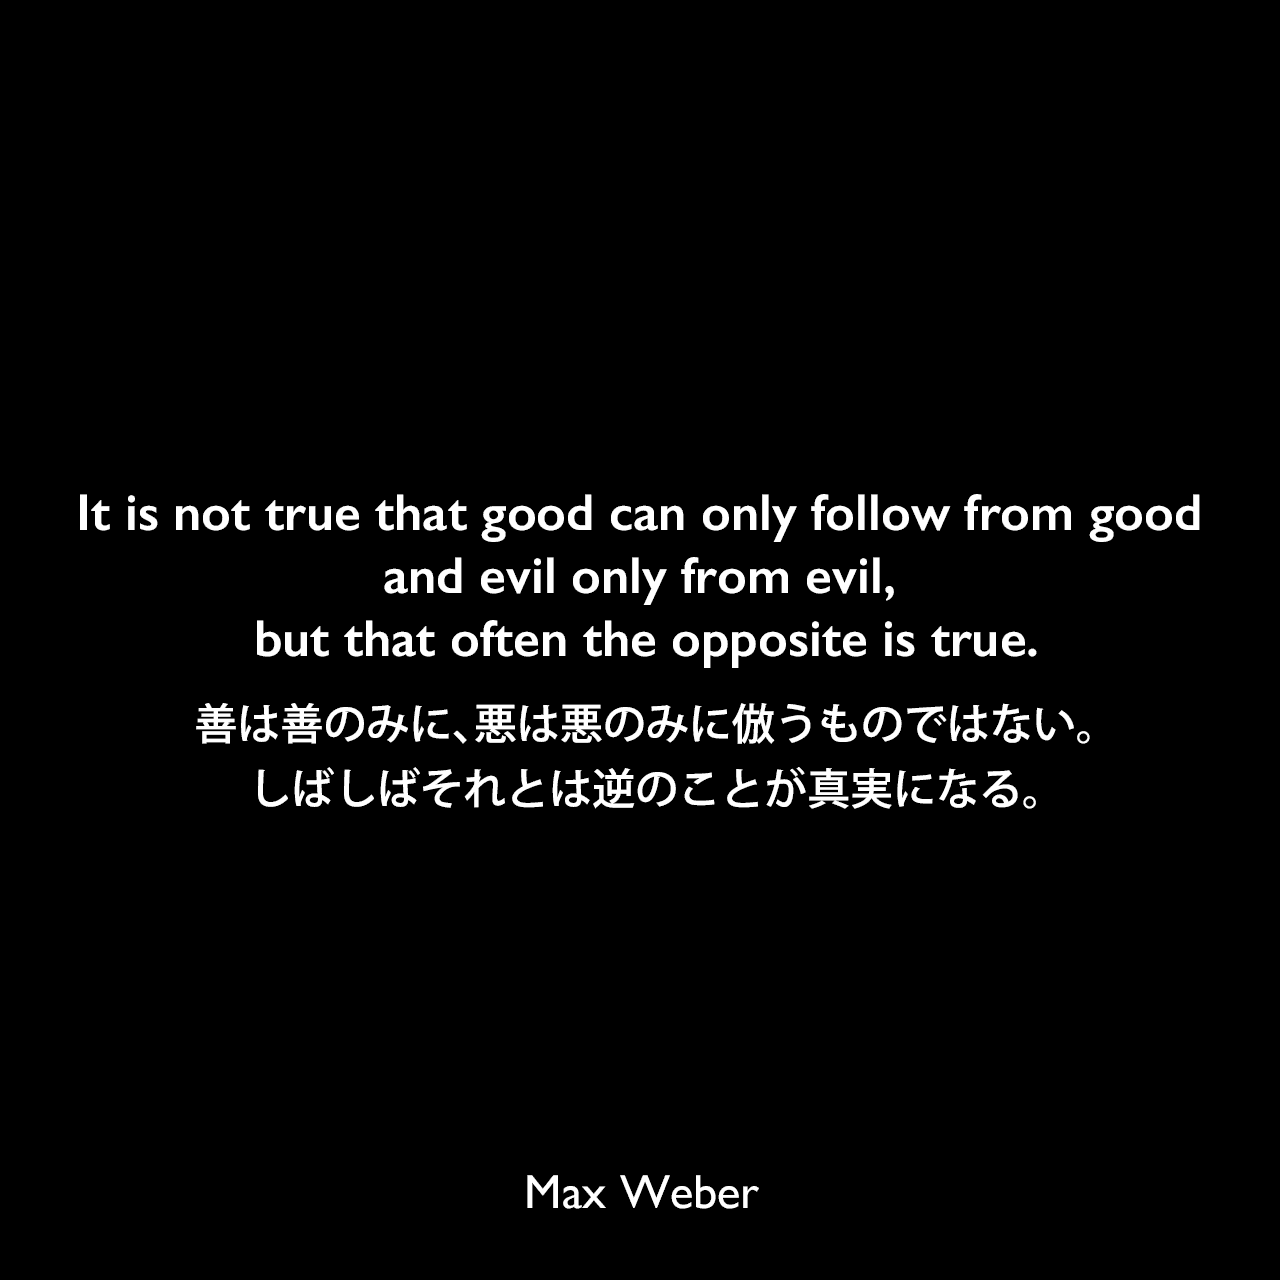 It is not true that good can only follow from good and evil only from evil, but that often the opposite is true.善は善のみに、悪は悪のみに倣うものではない。しばしばそれとは逆のことが真実になる。Max Weber